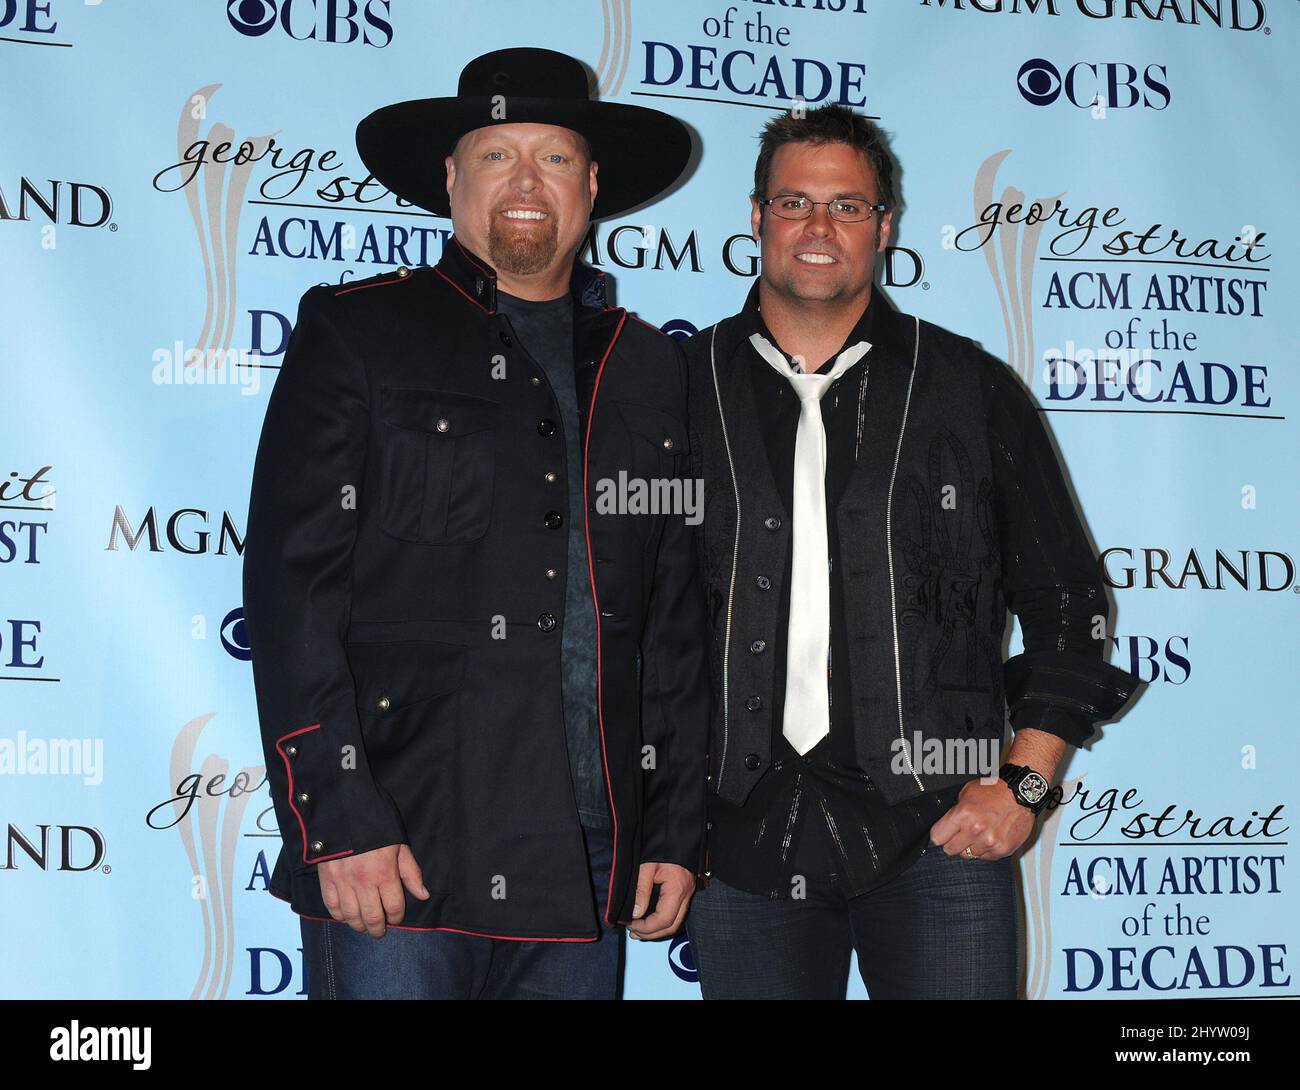 Montgomery Gentry at the George Strait: ACM Artist of the Decade All Star Concert held at the MGM Grand Garden Arena, Las Vegas, Nevada, USA. Stock Photo